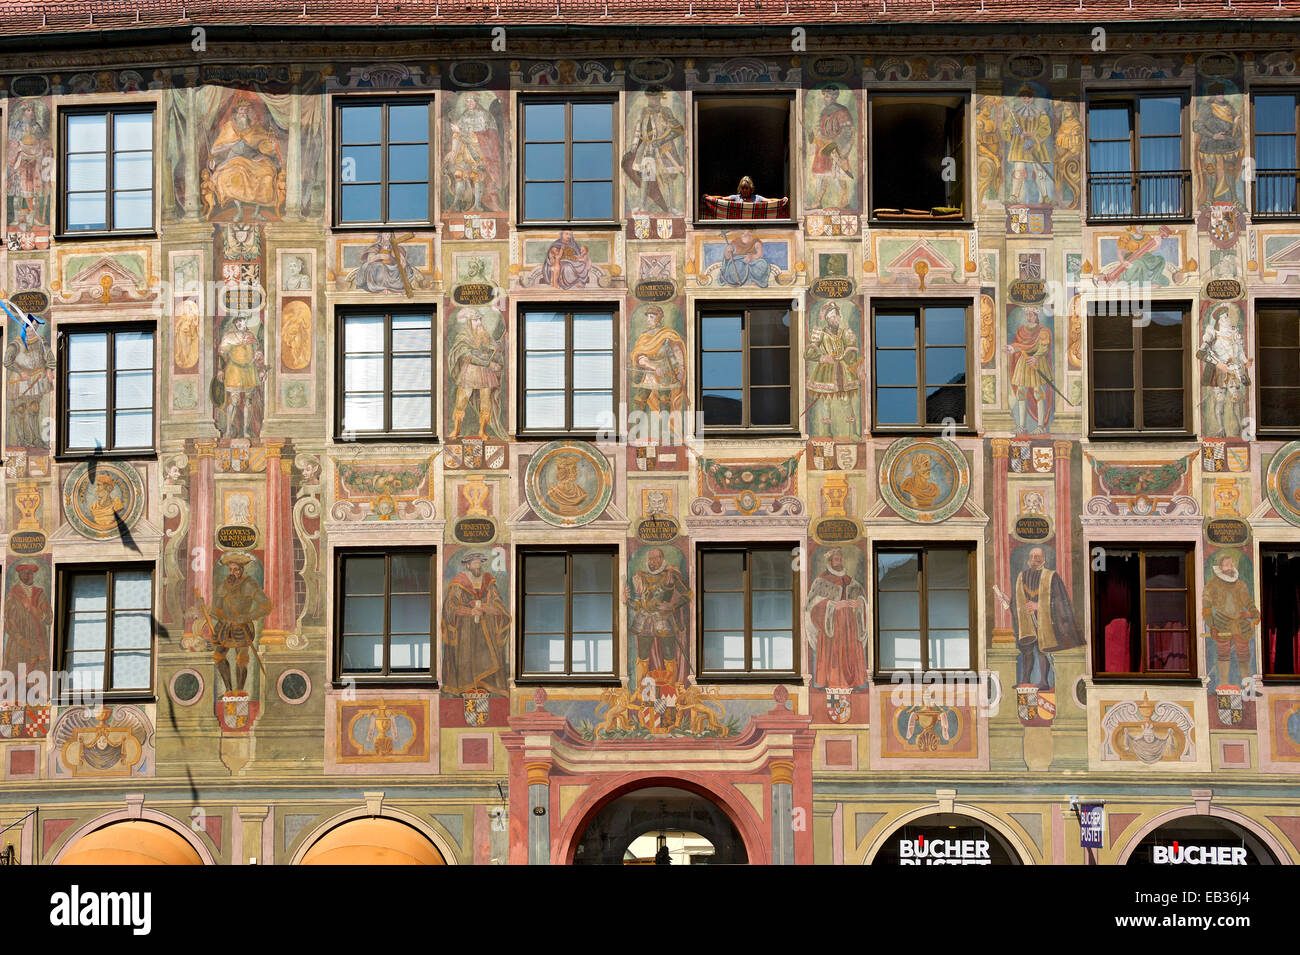 Paintings of the genealogy of the House of Wittelsbach, anno 1598, Landschaftshaus or Alte Post building, historic center Stock Photo